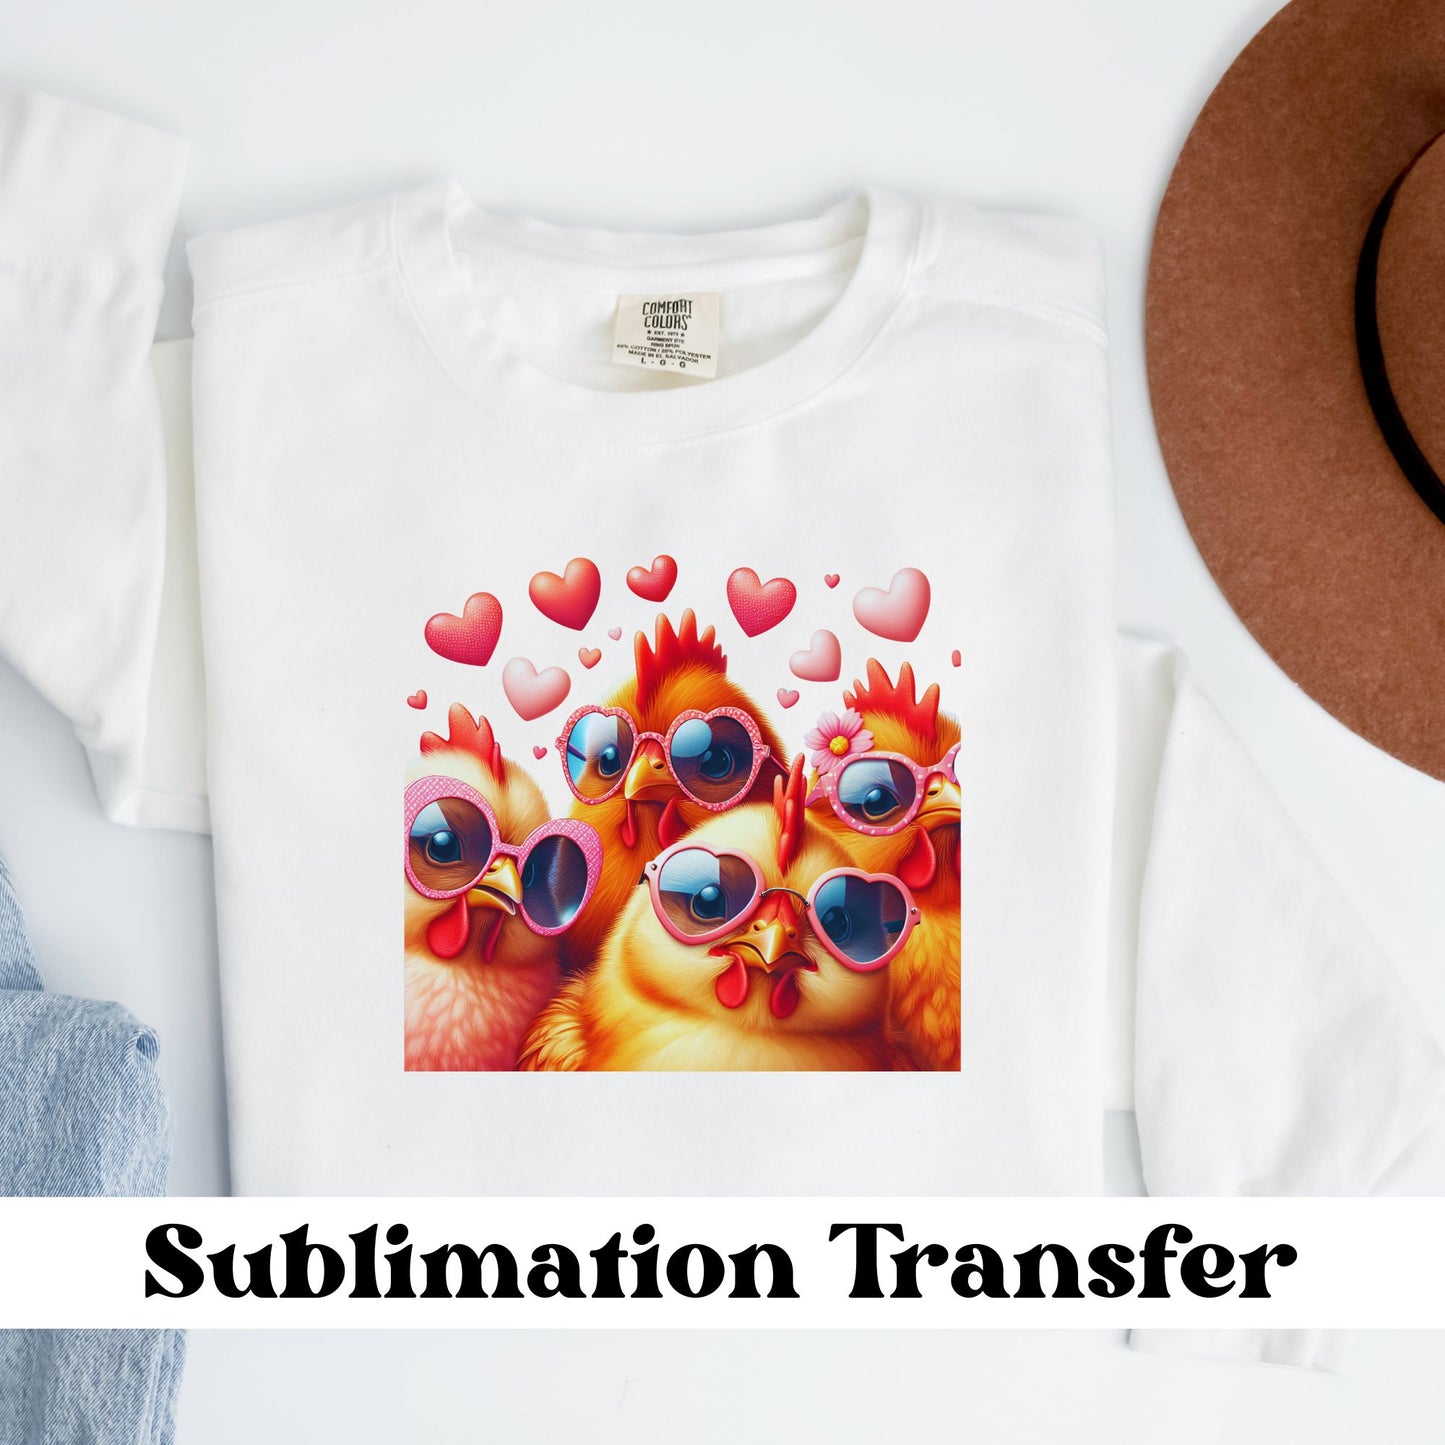 Cool Chickens Sublimation Transfer